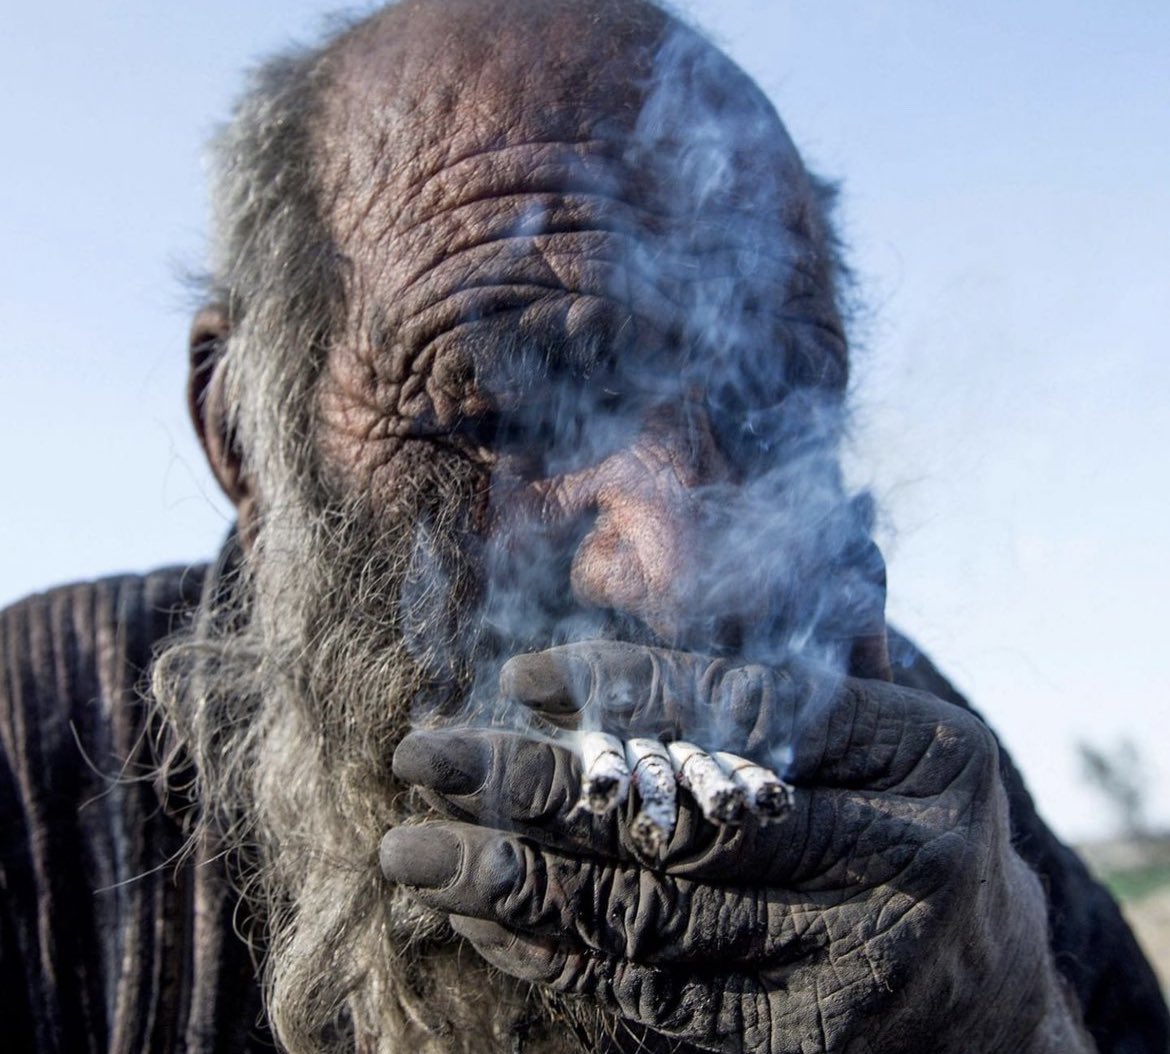 'World's Dirtiest Man' dies in Iran at the age of 94. Amou Haji, who gained notoriety as the 'world's dirtiest man,' has passed away in Iran at the age of 94. Local media reported that Haji, who lived in a cinder block shack, was covered in soot and had not bathed with water or